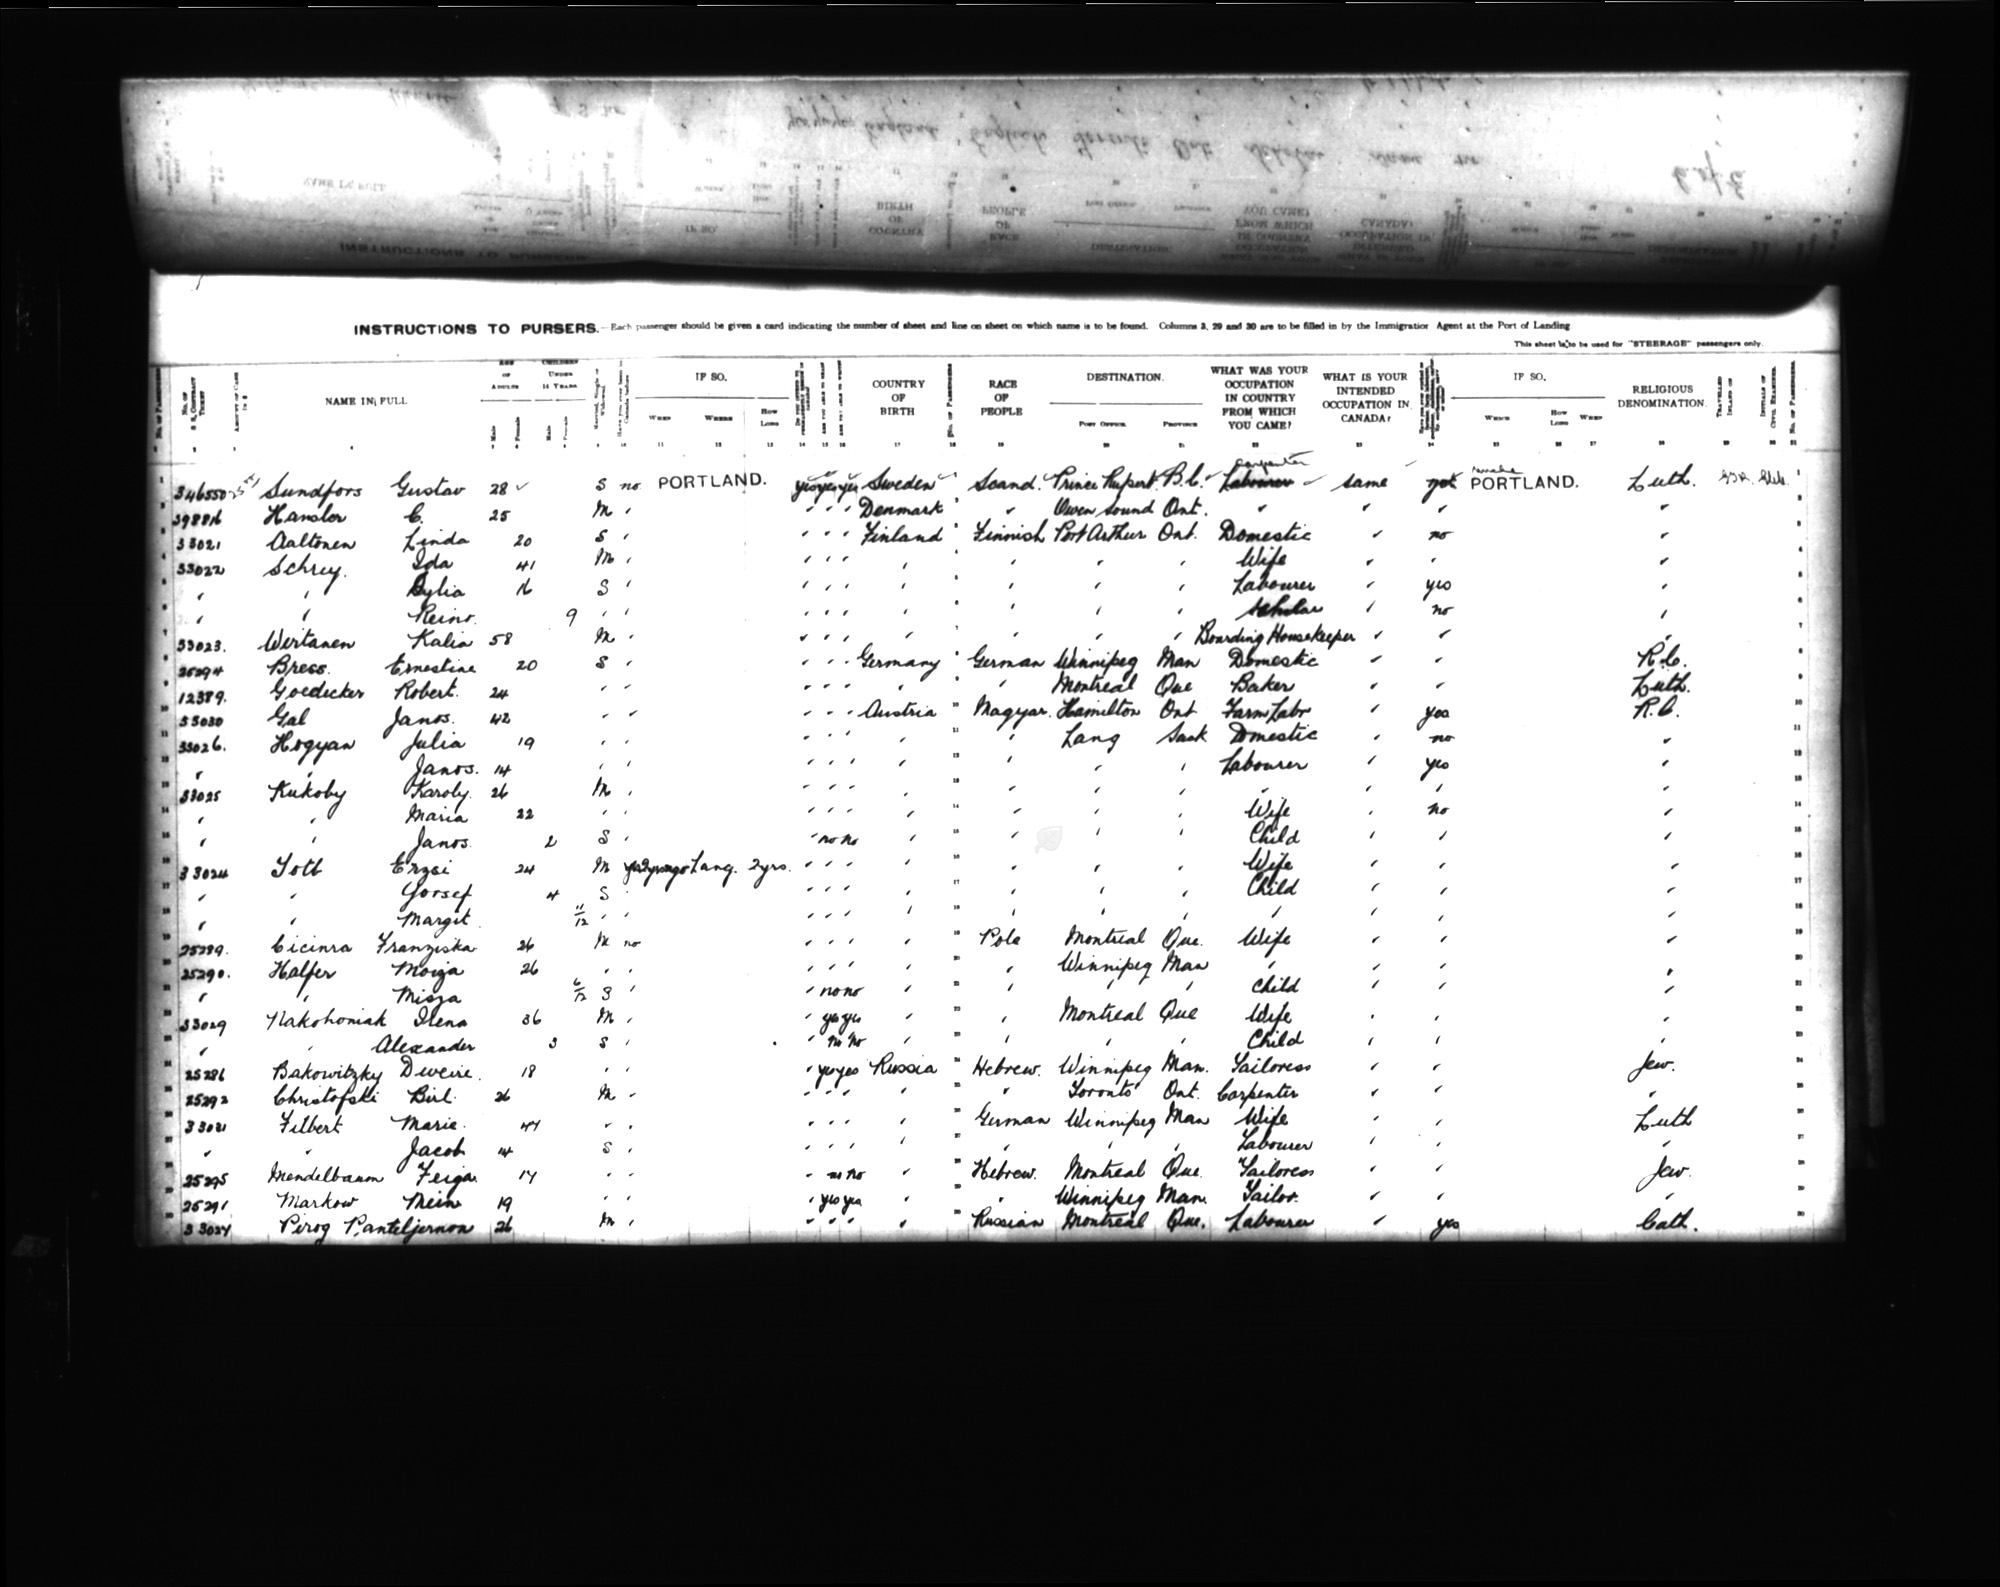 Digitized page of Passenger Lists for Image No.: CANIMM1913PLIST_0000406960-00587